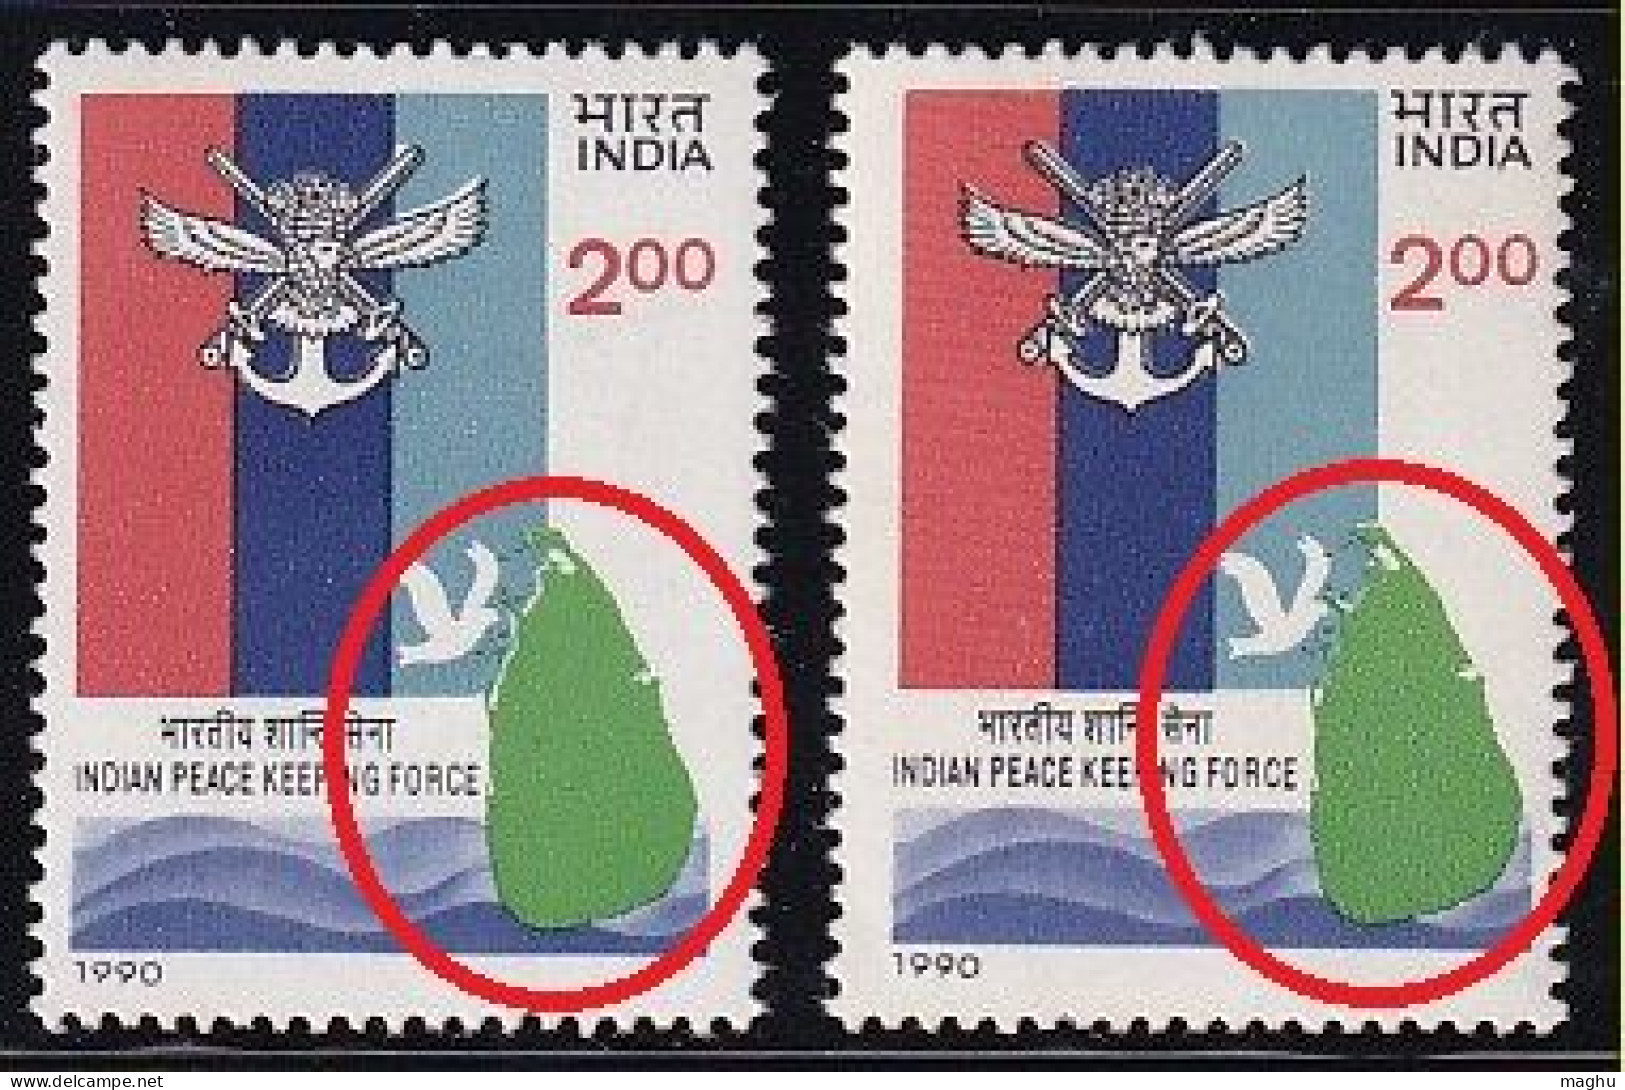 EFO: Colour Shift Variety, India MNH 1990 IPKF, Indian Peace Keeping Force, Sri Lanka Map, Geography, Army, Defence - Errors, Freaks & Oddities (EFO)